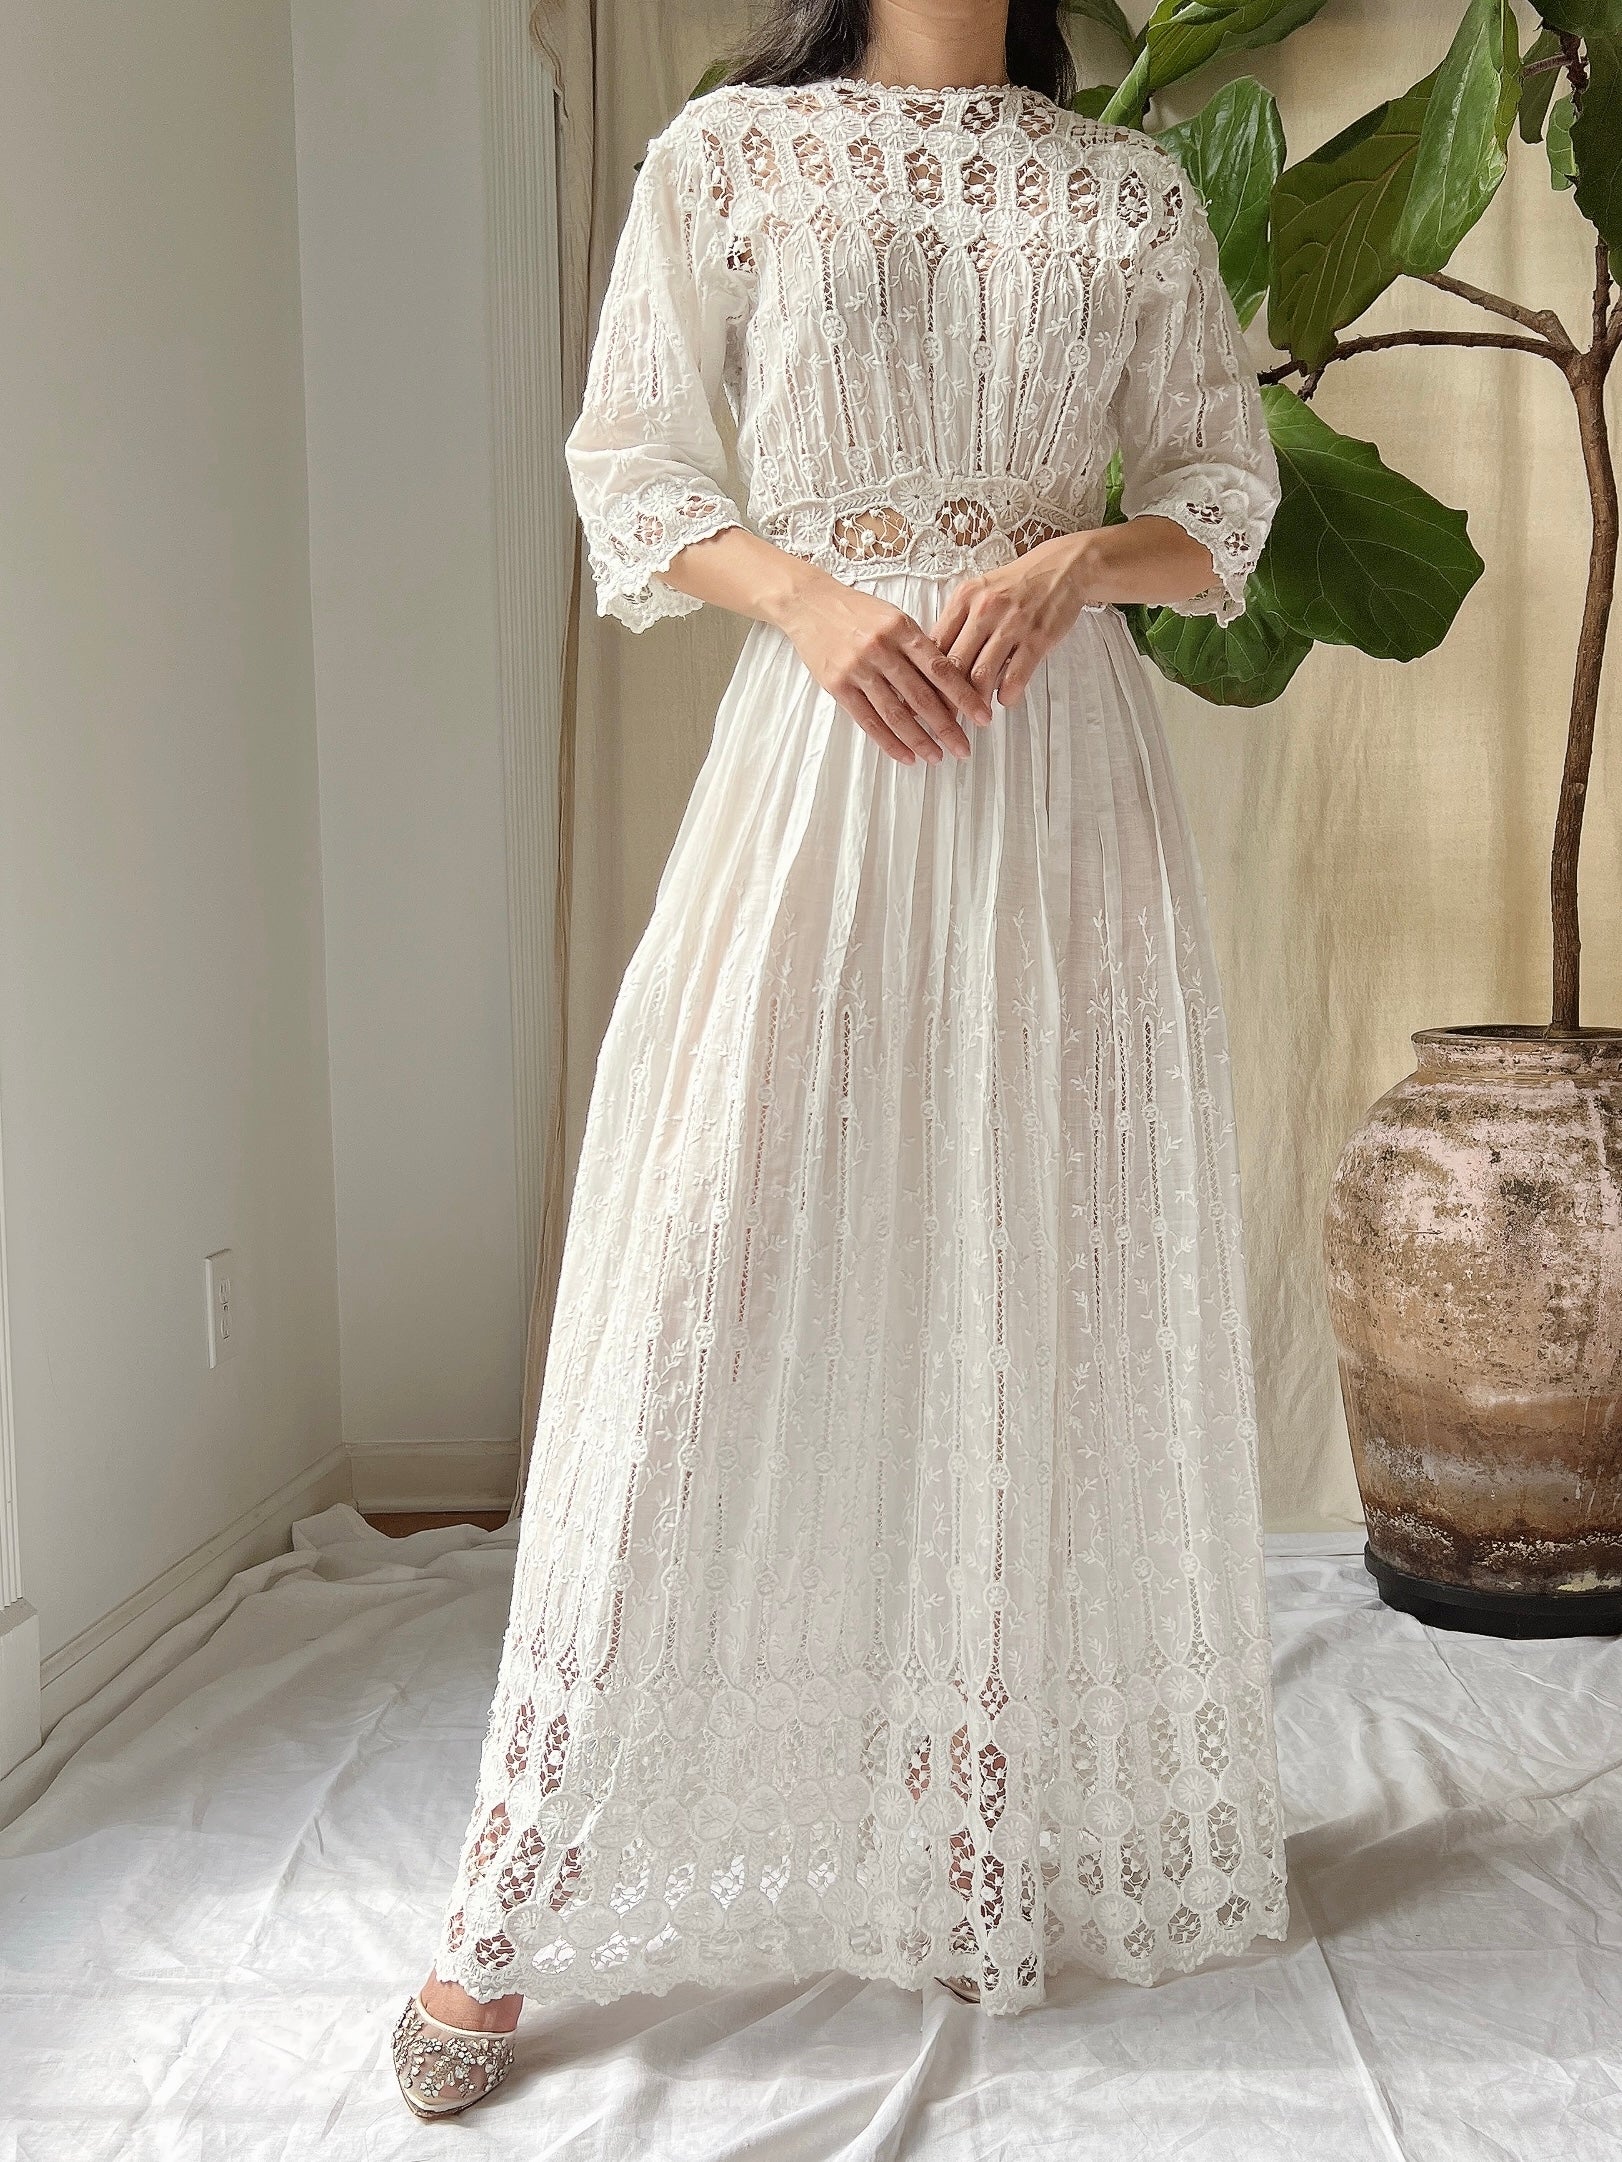 Antique Cotton Embroidered Dress - S